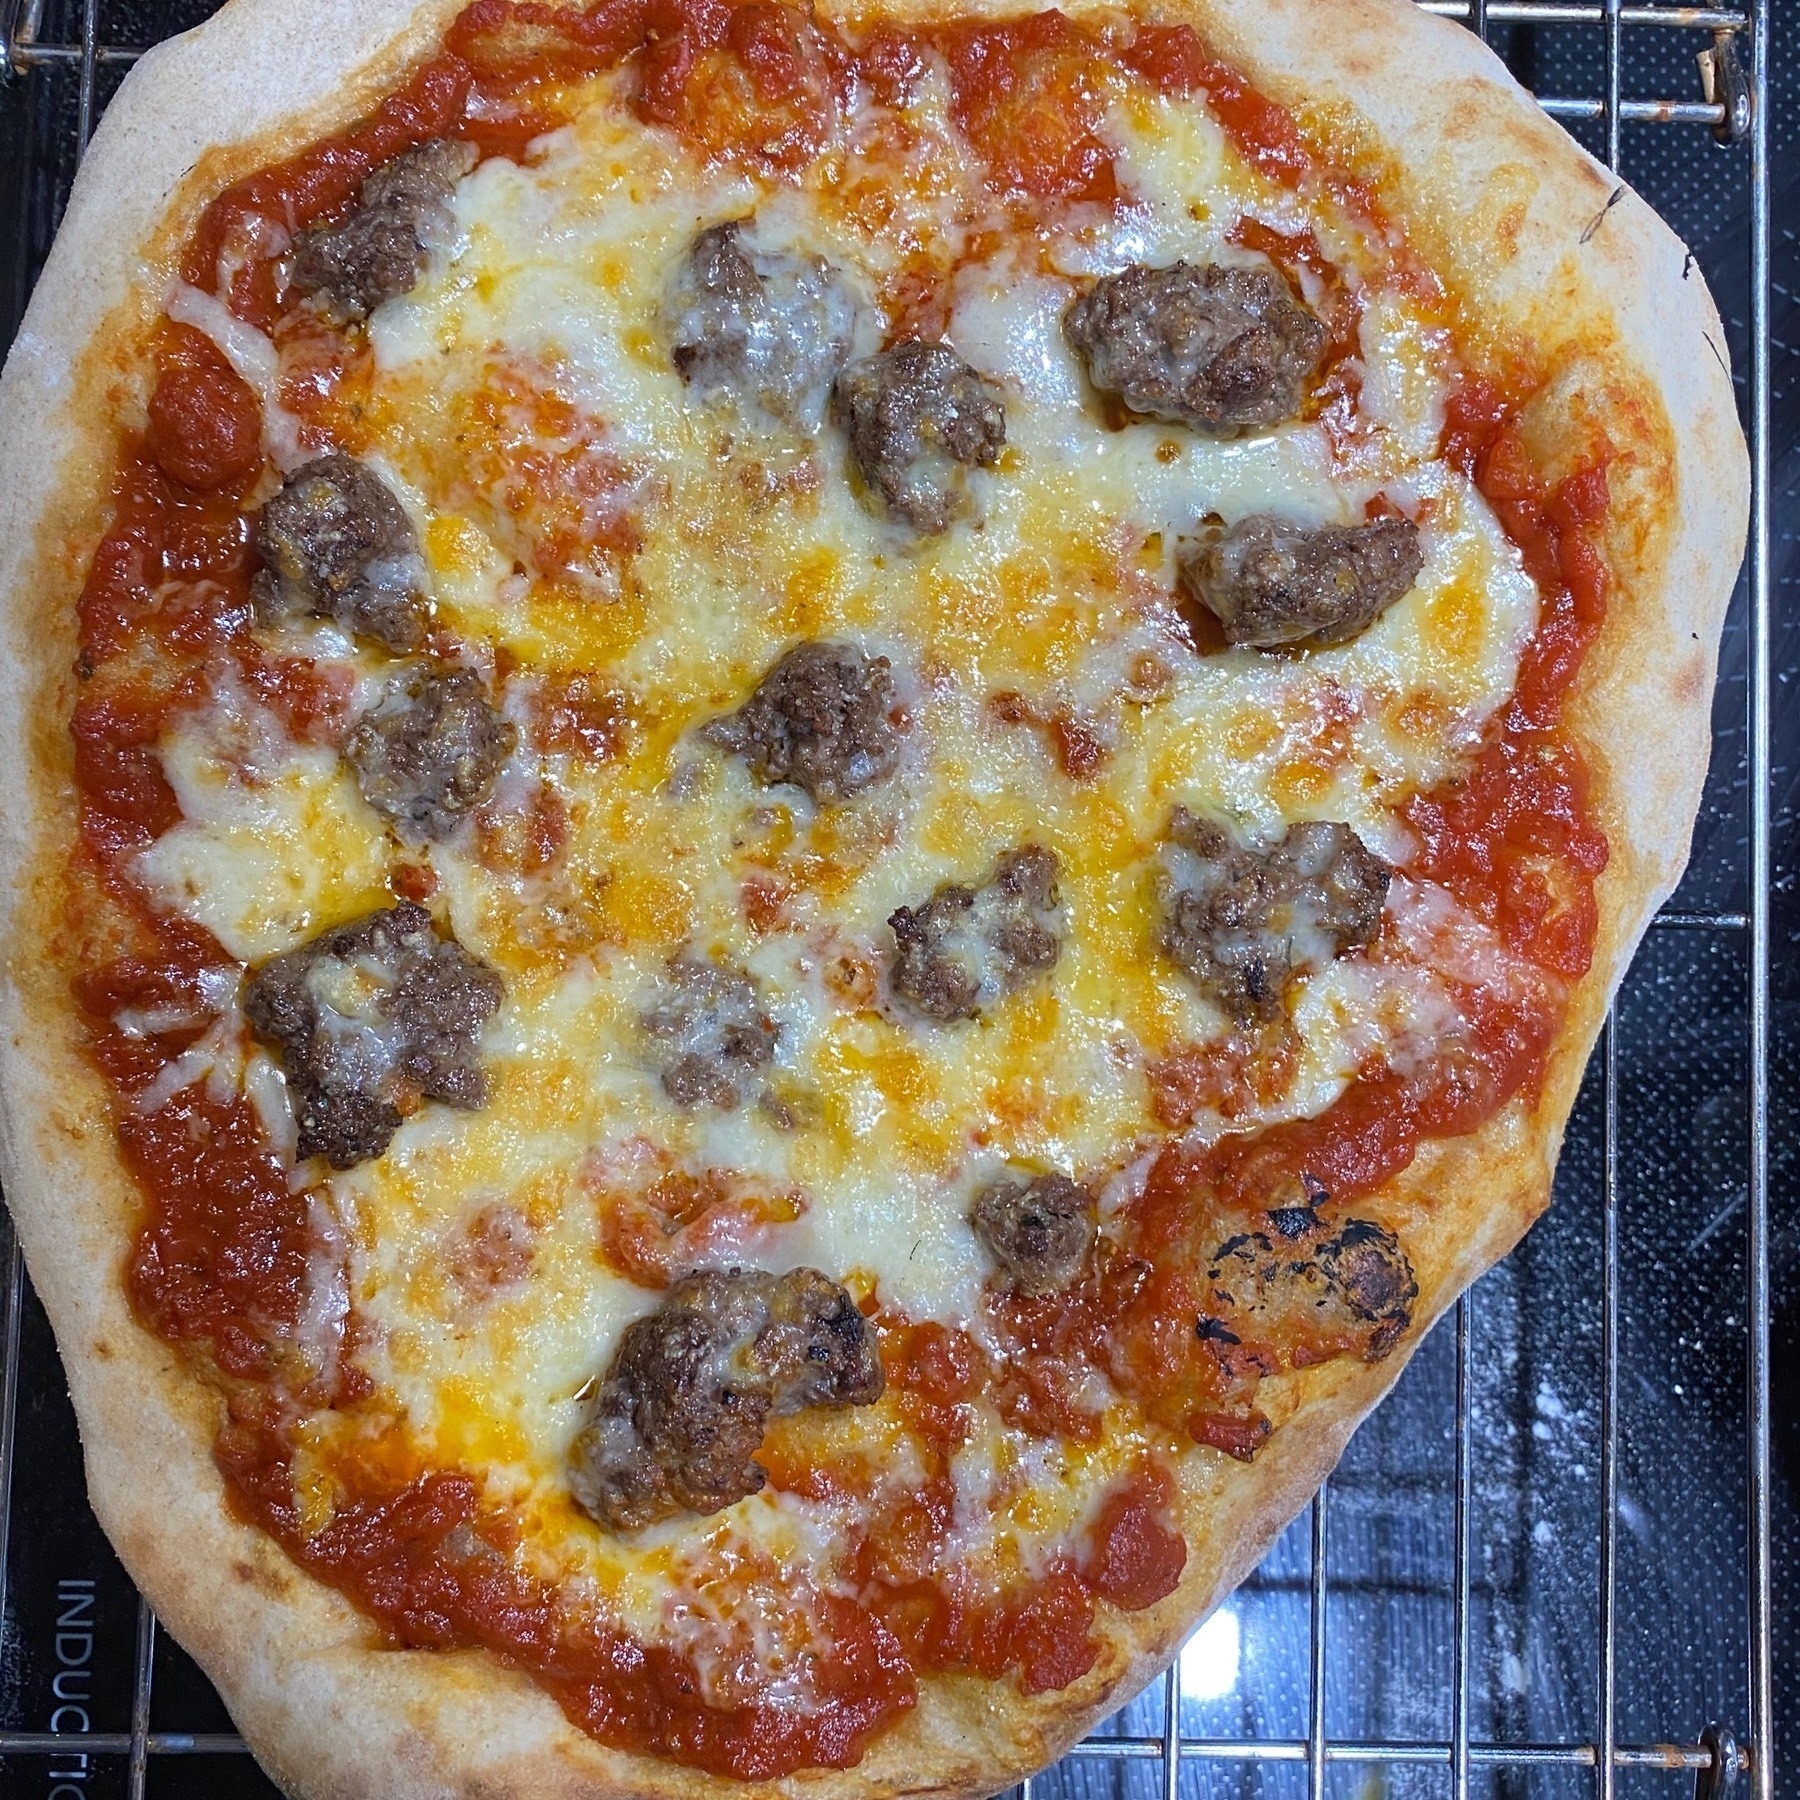 A small pizza on a cooling rack.